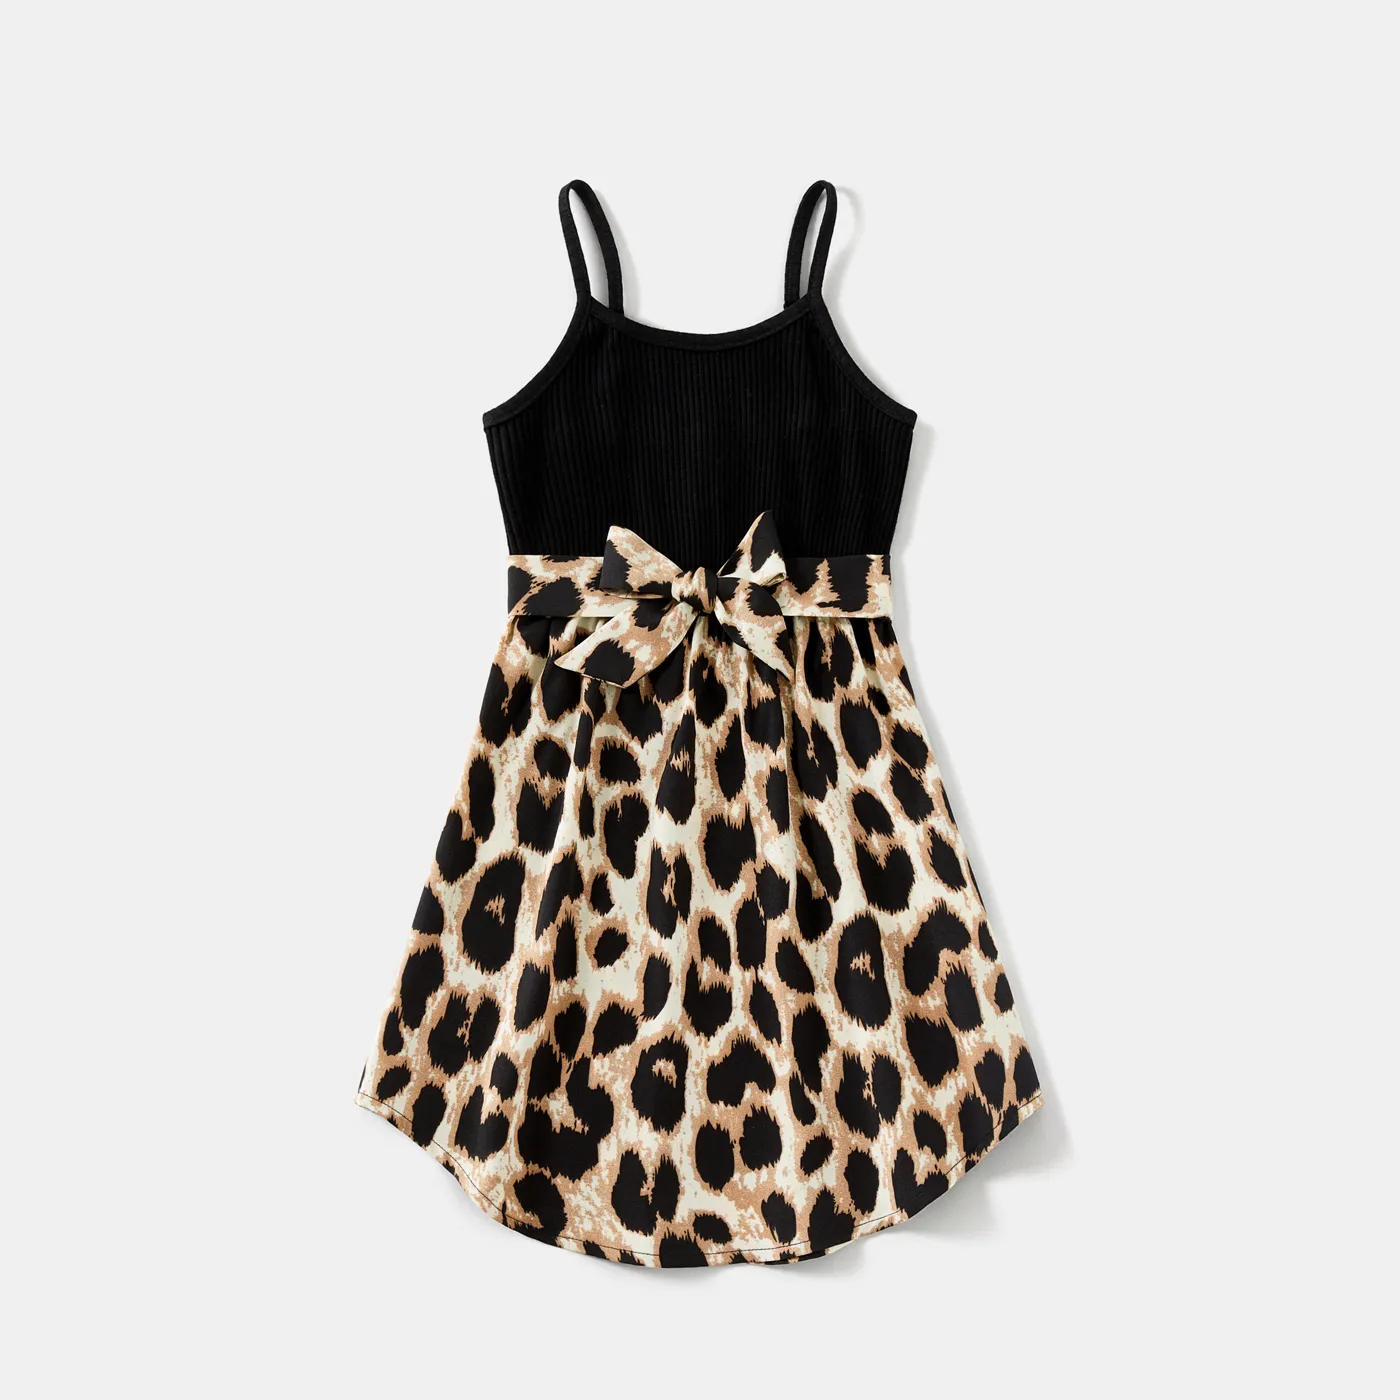 Family Matching 95% Cotton Short-sleeve T-shirts and Rib Knit Spliced Leopard Belted Cami Dresses Se